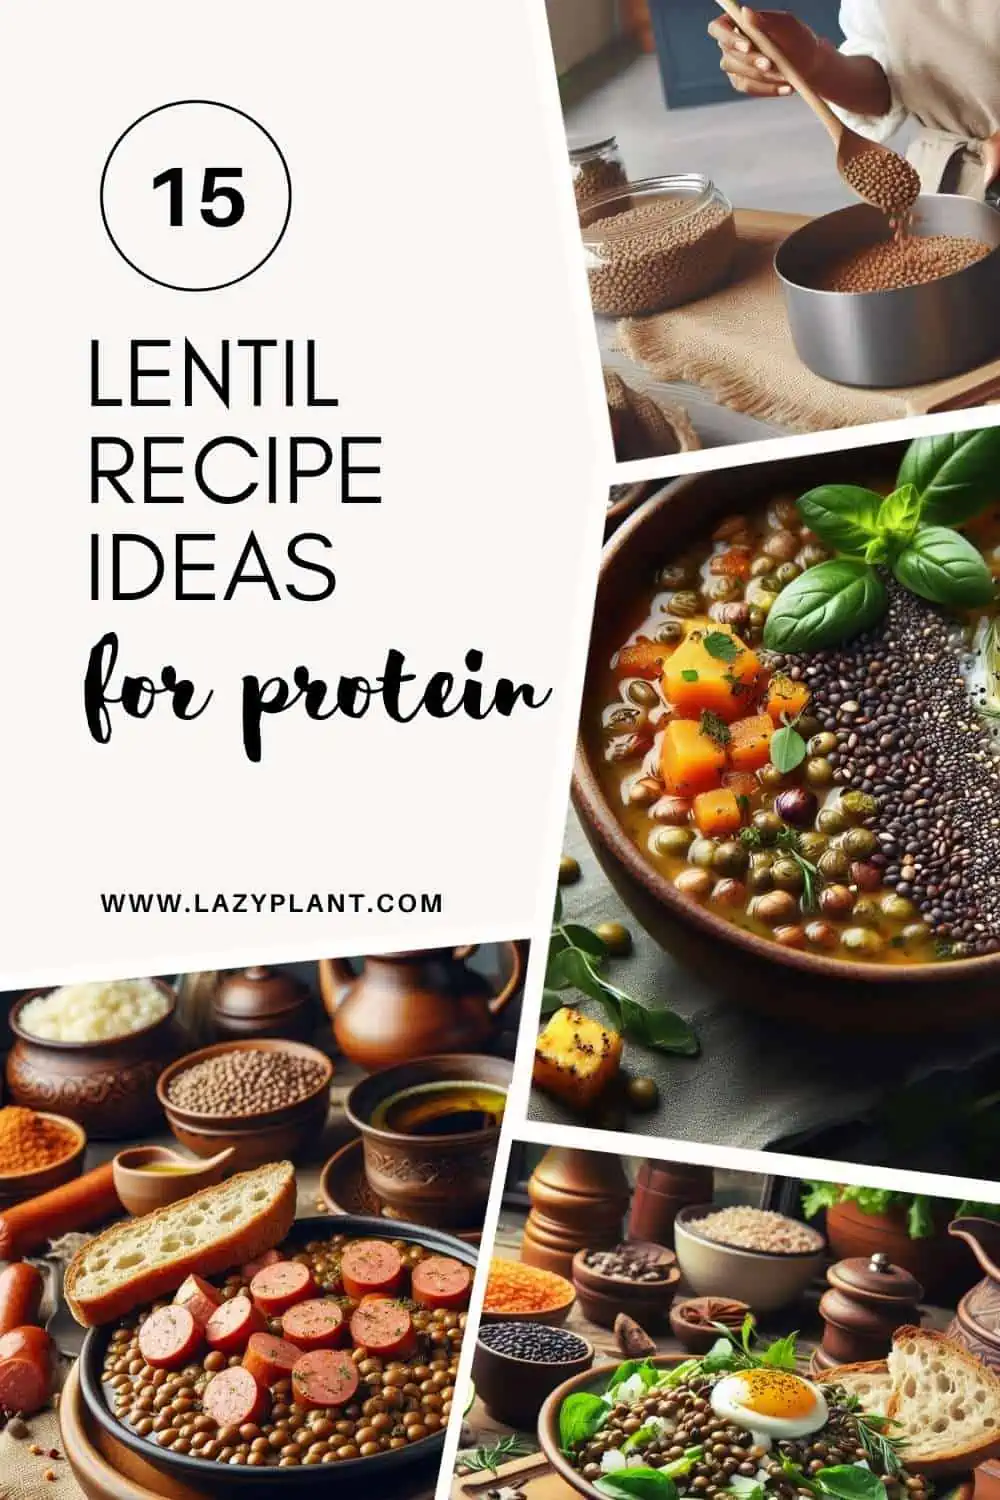 Recipe Ideas with Lentils for protein!